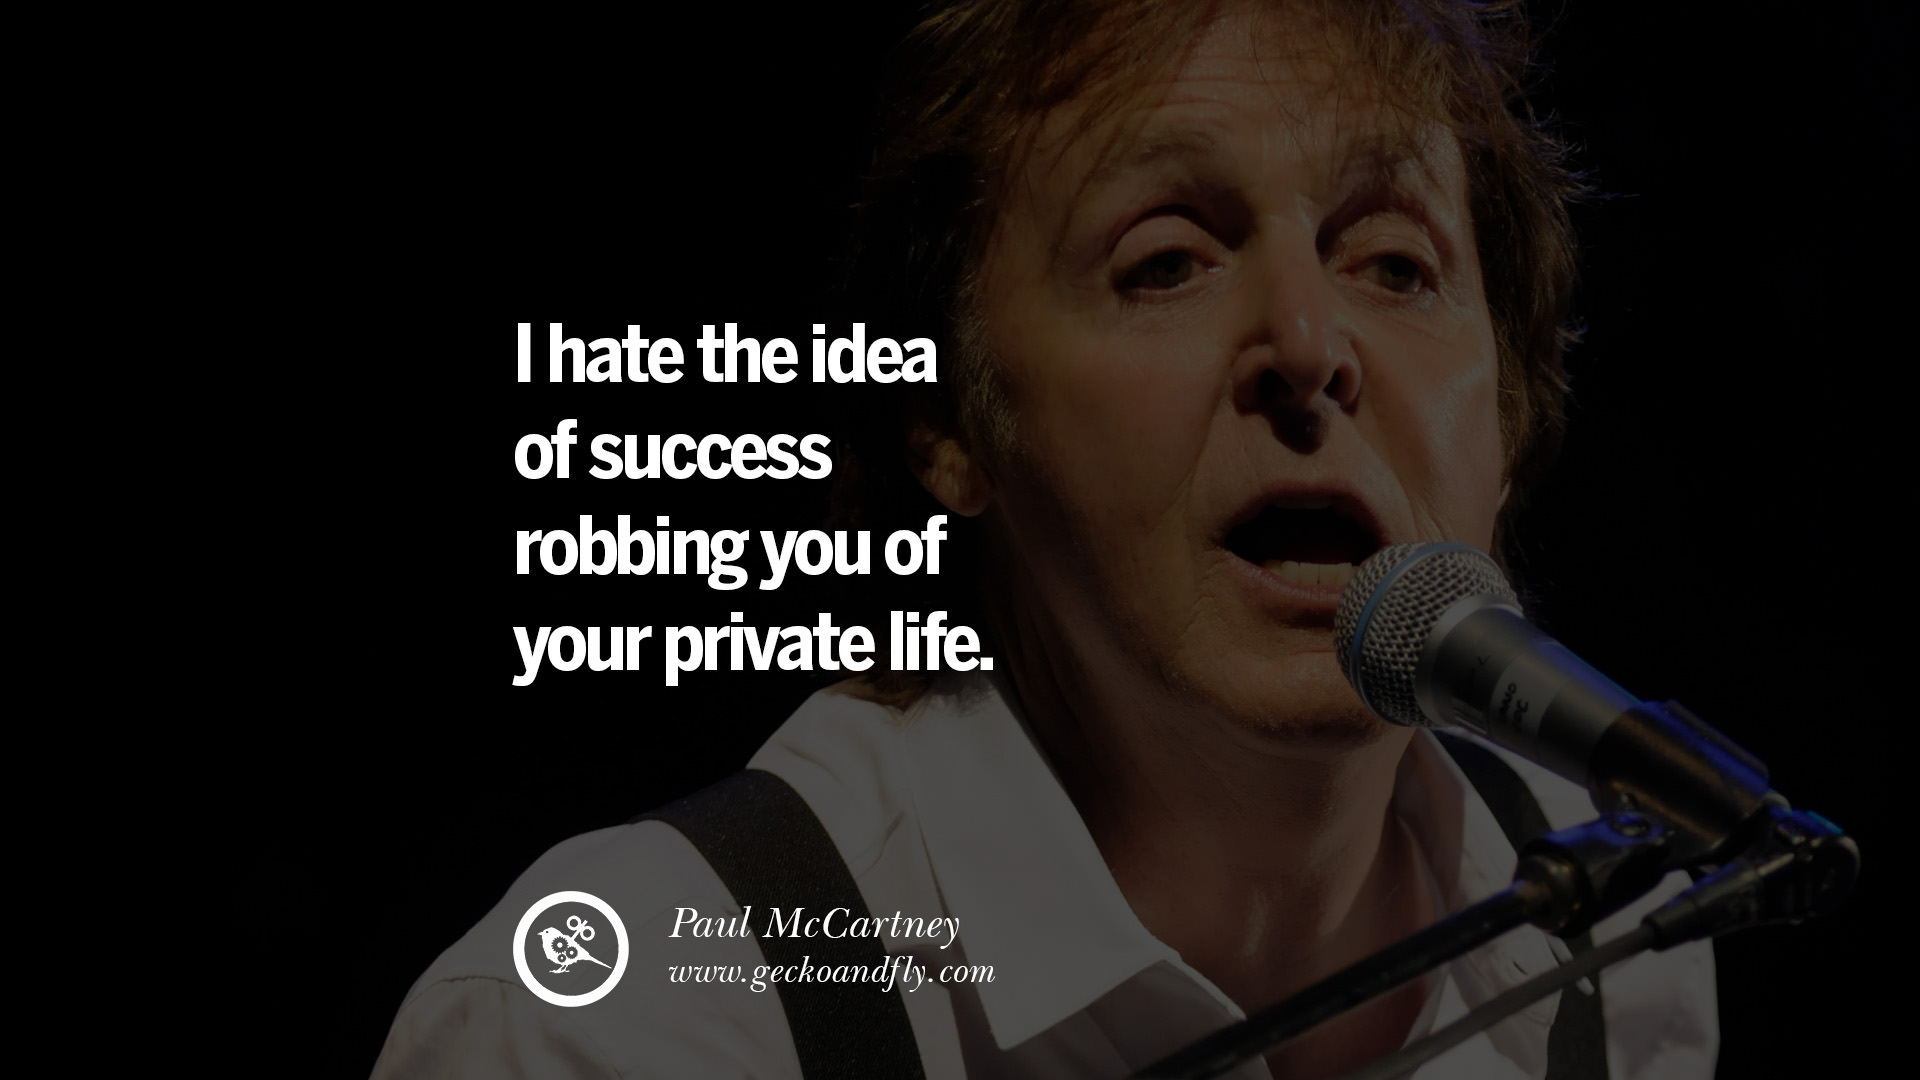 10 Quote by Paul McCartney on Ve arianism Life and Love